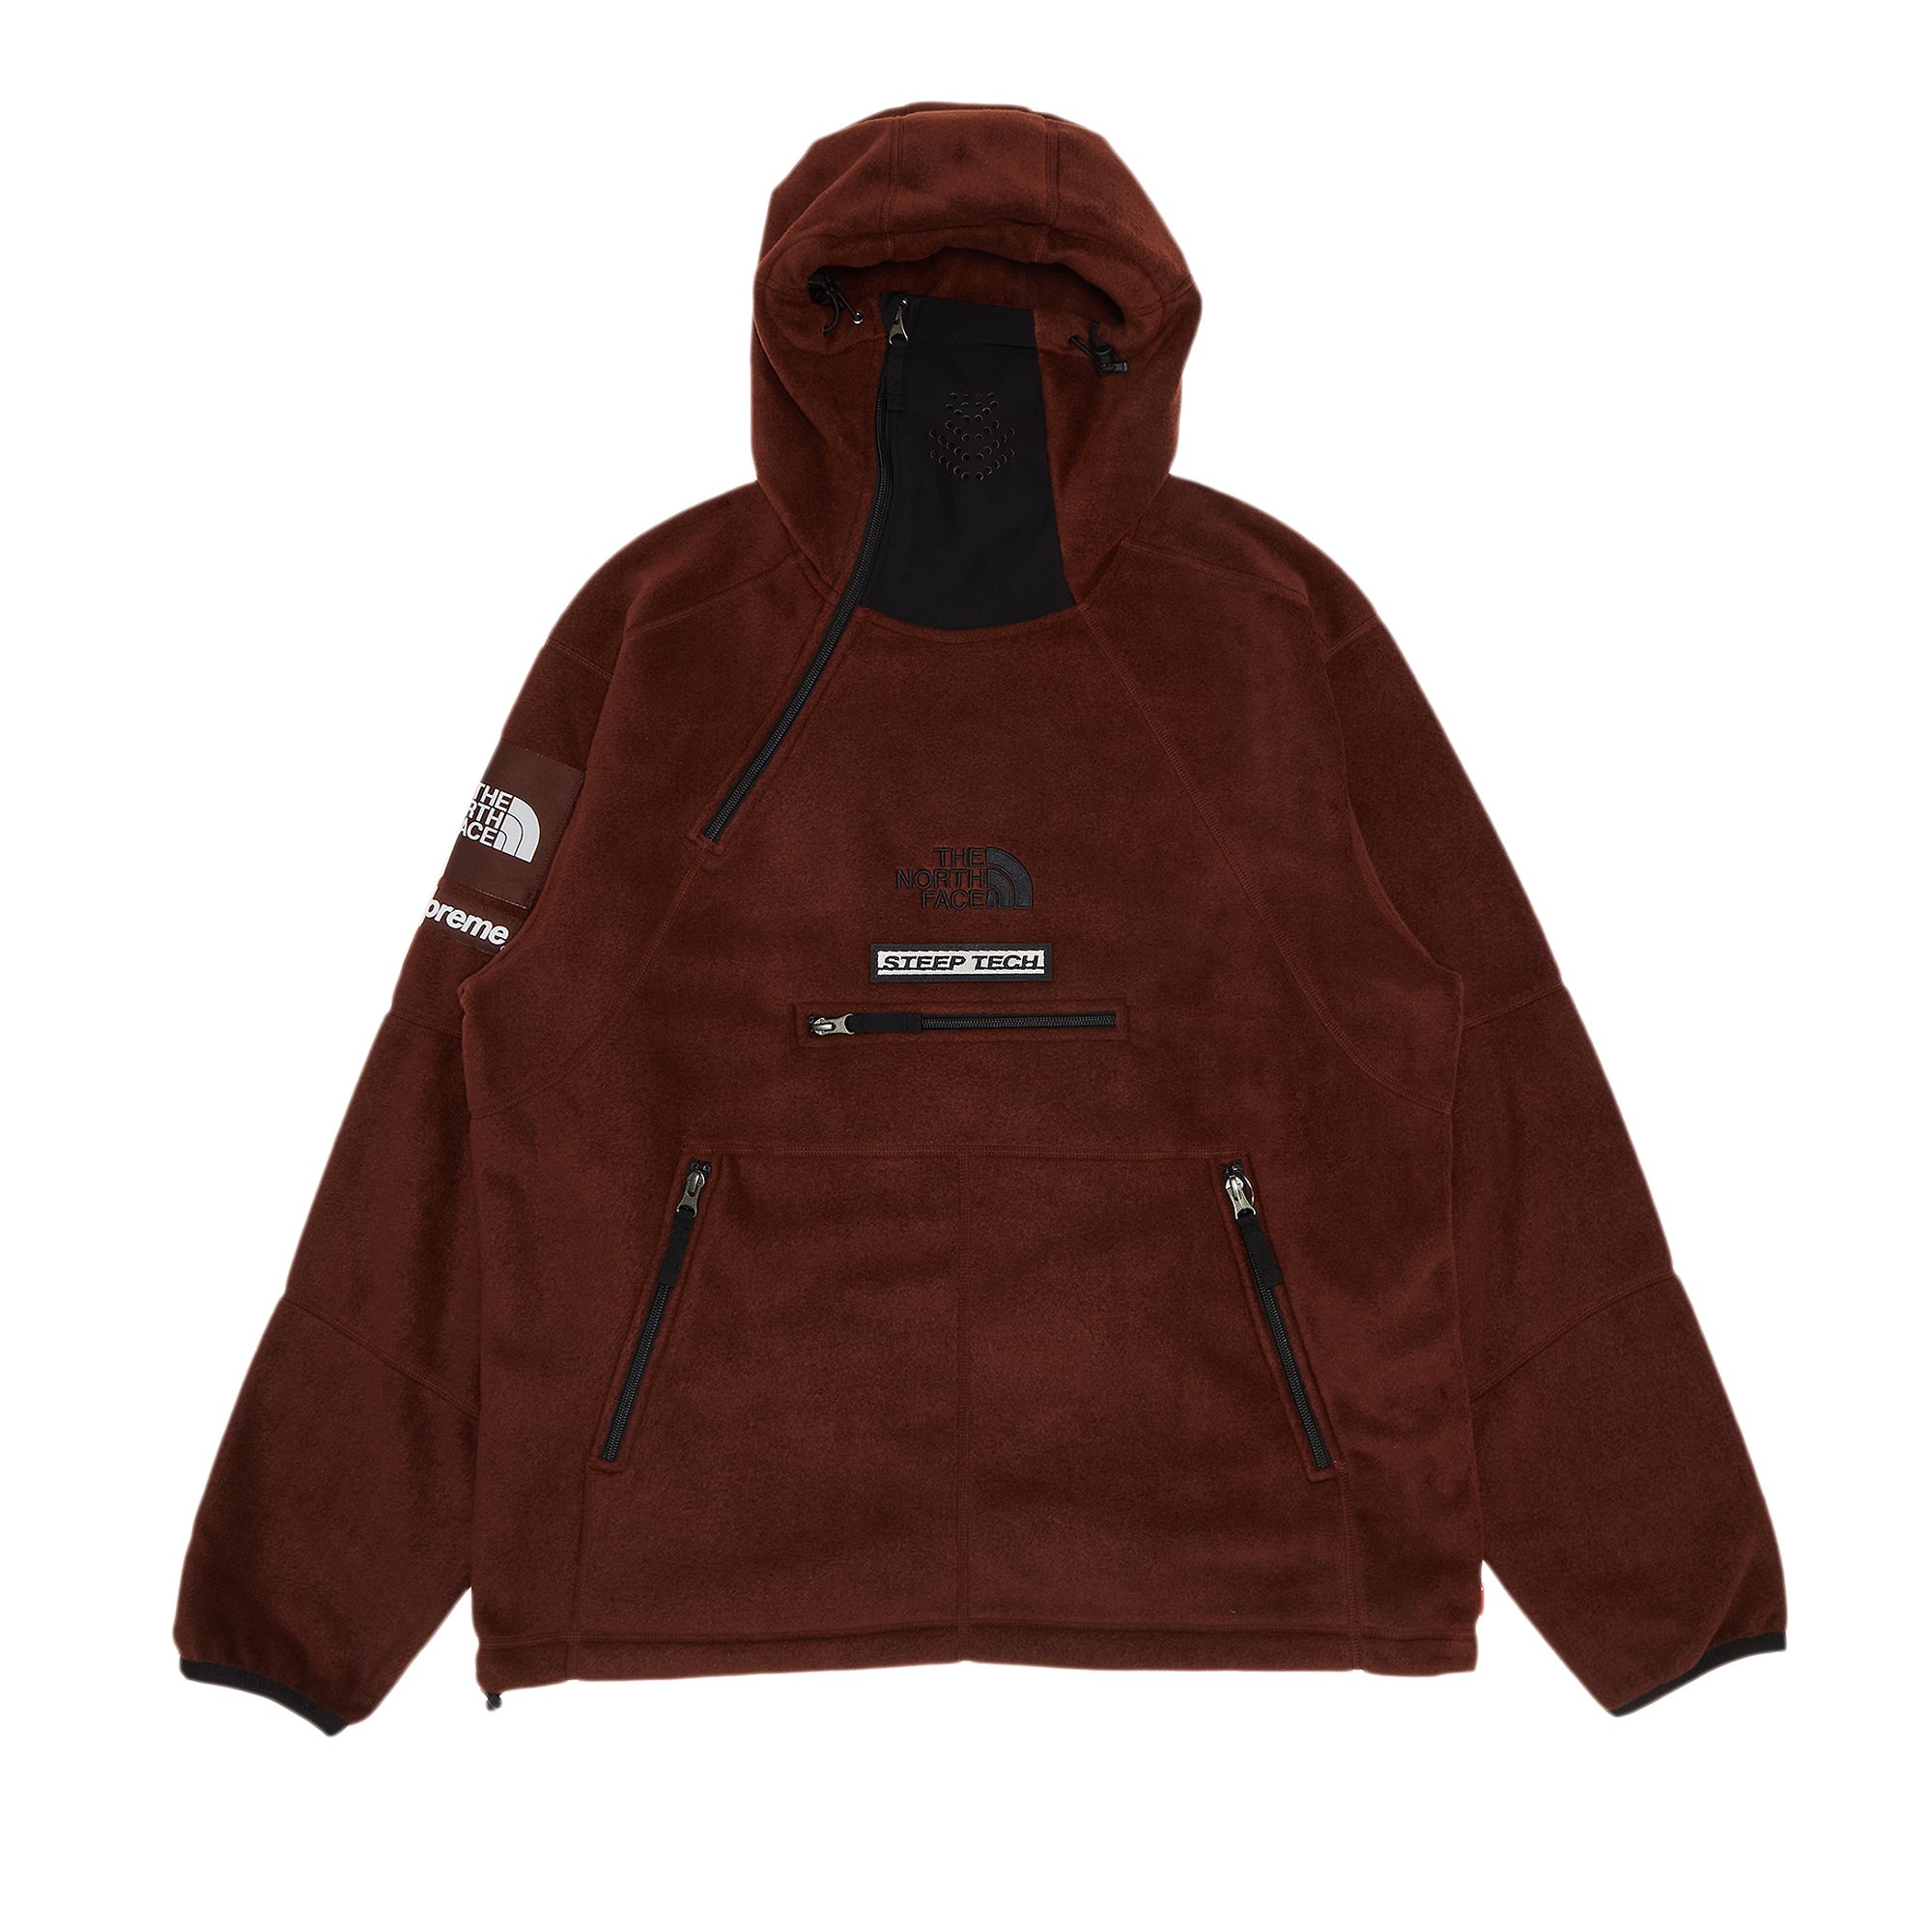 Buy Supreme x The North Face Steep Tech Fleece Pullover 'Brown ...